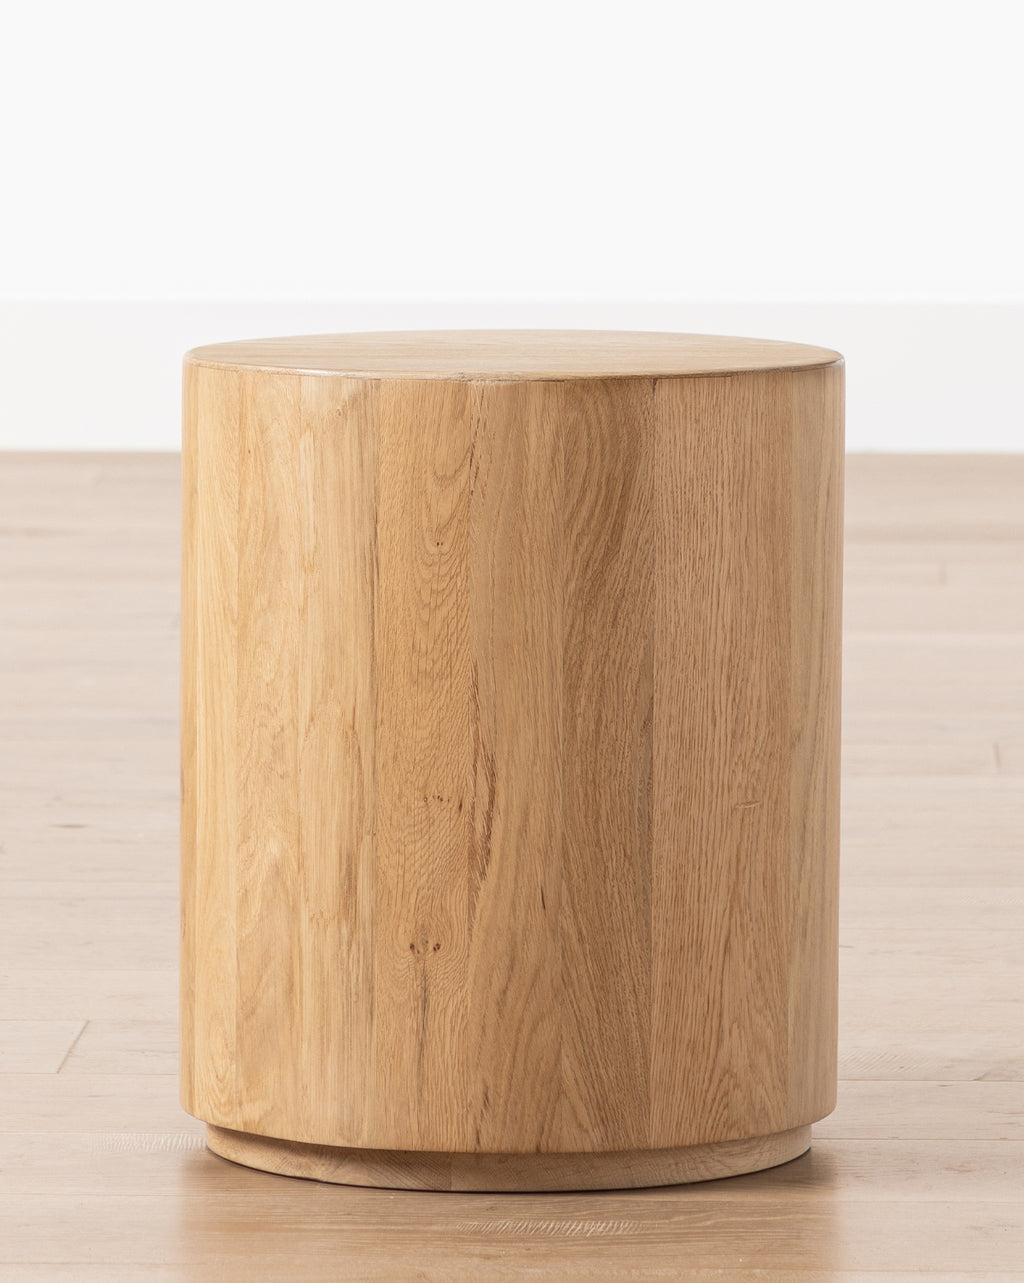 Marlow Bedside Table - Dark Stain, Atkin and Thyme